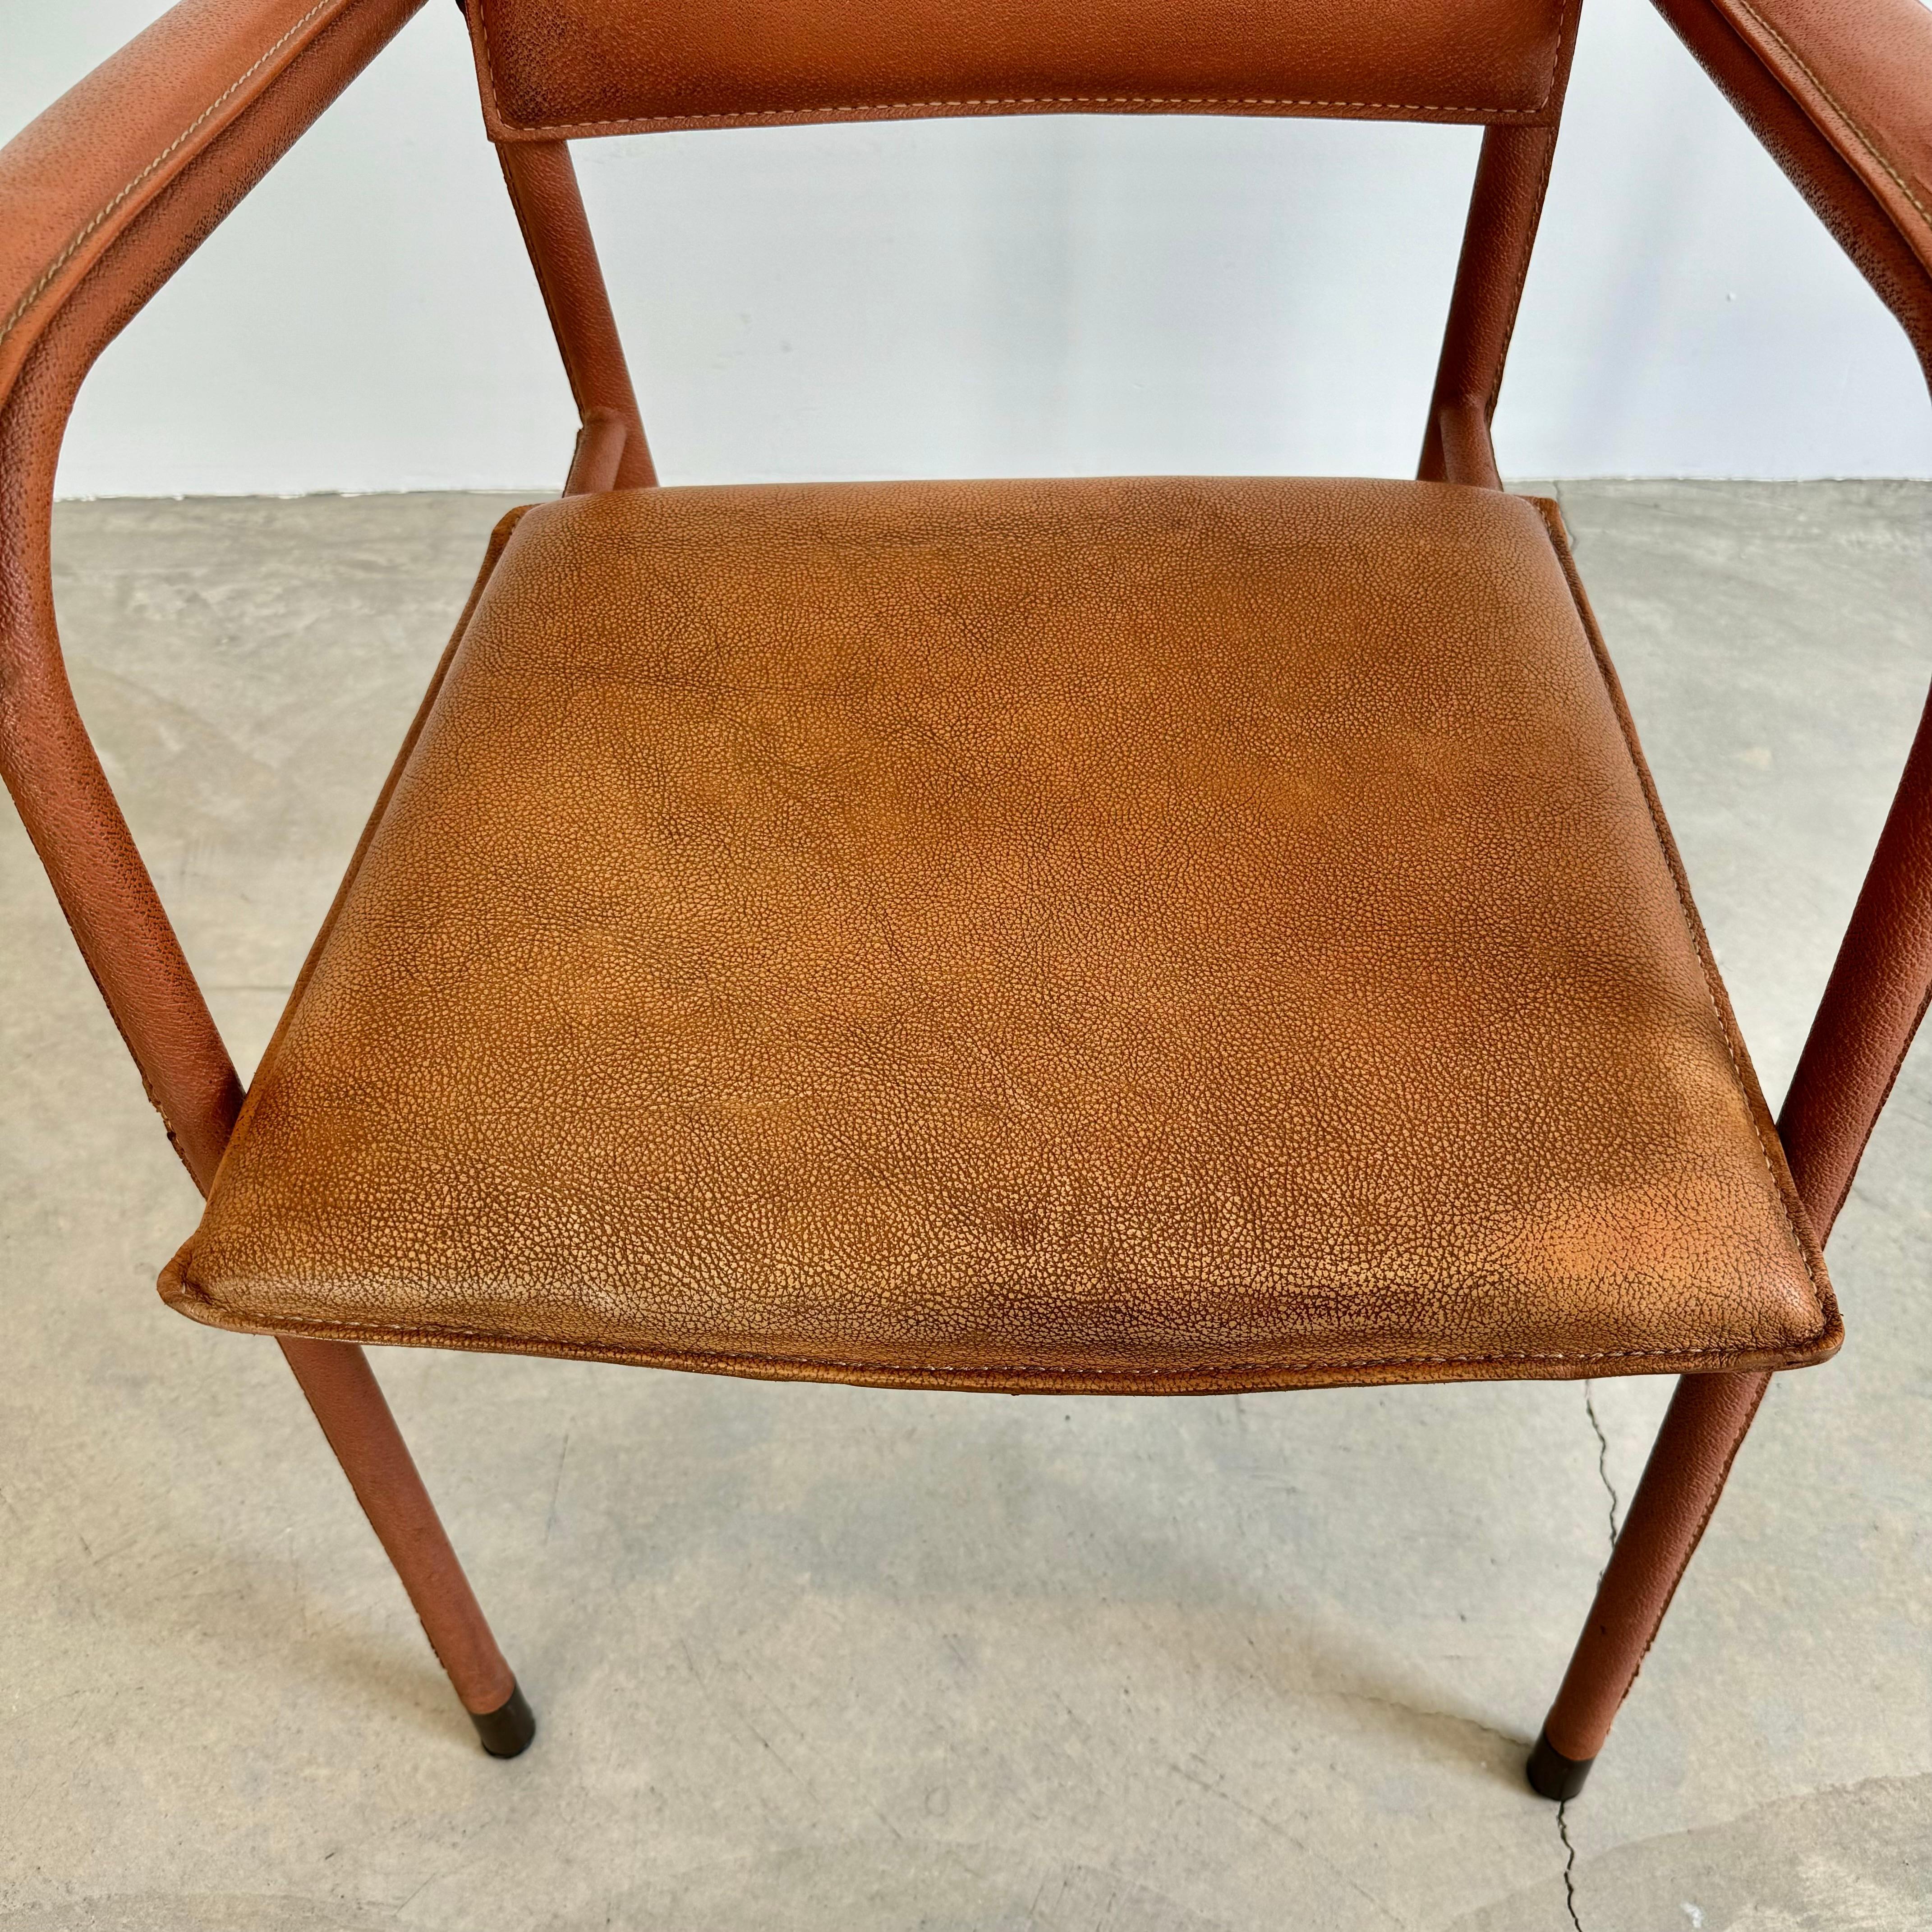 Jacques Adnet Leather Armchair, 1950s France For Sale 7